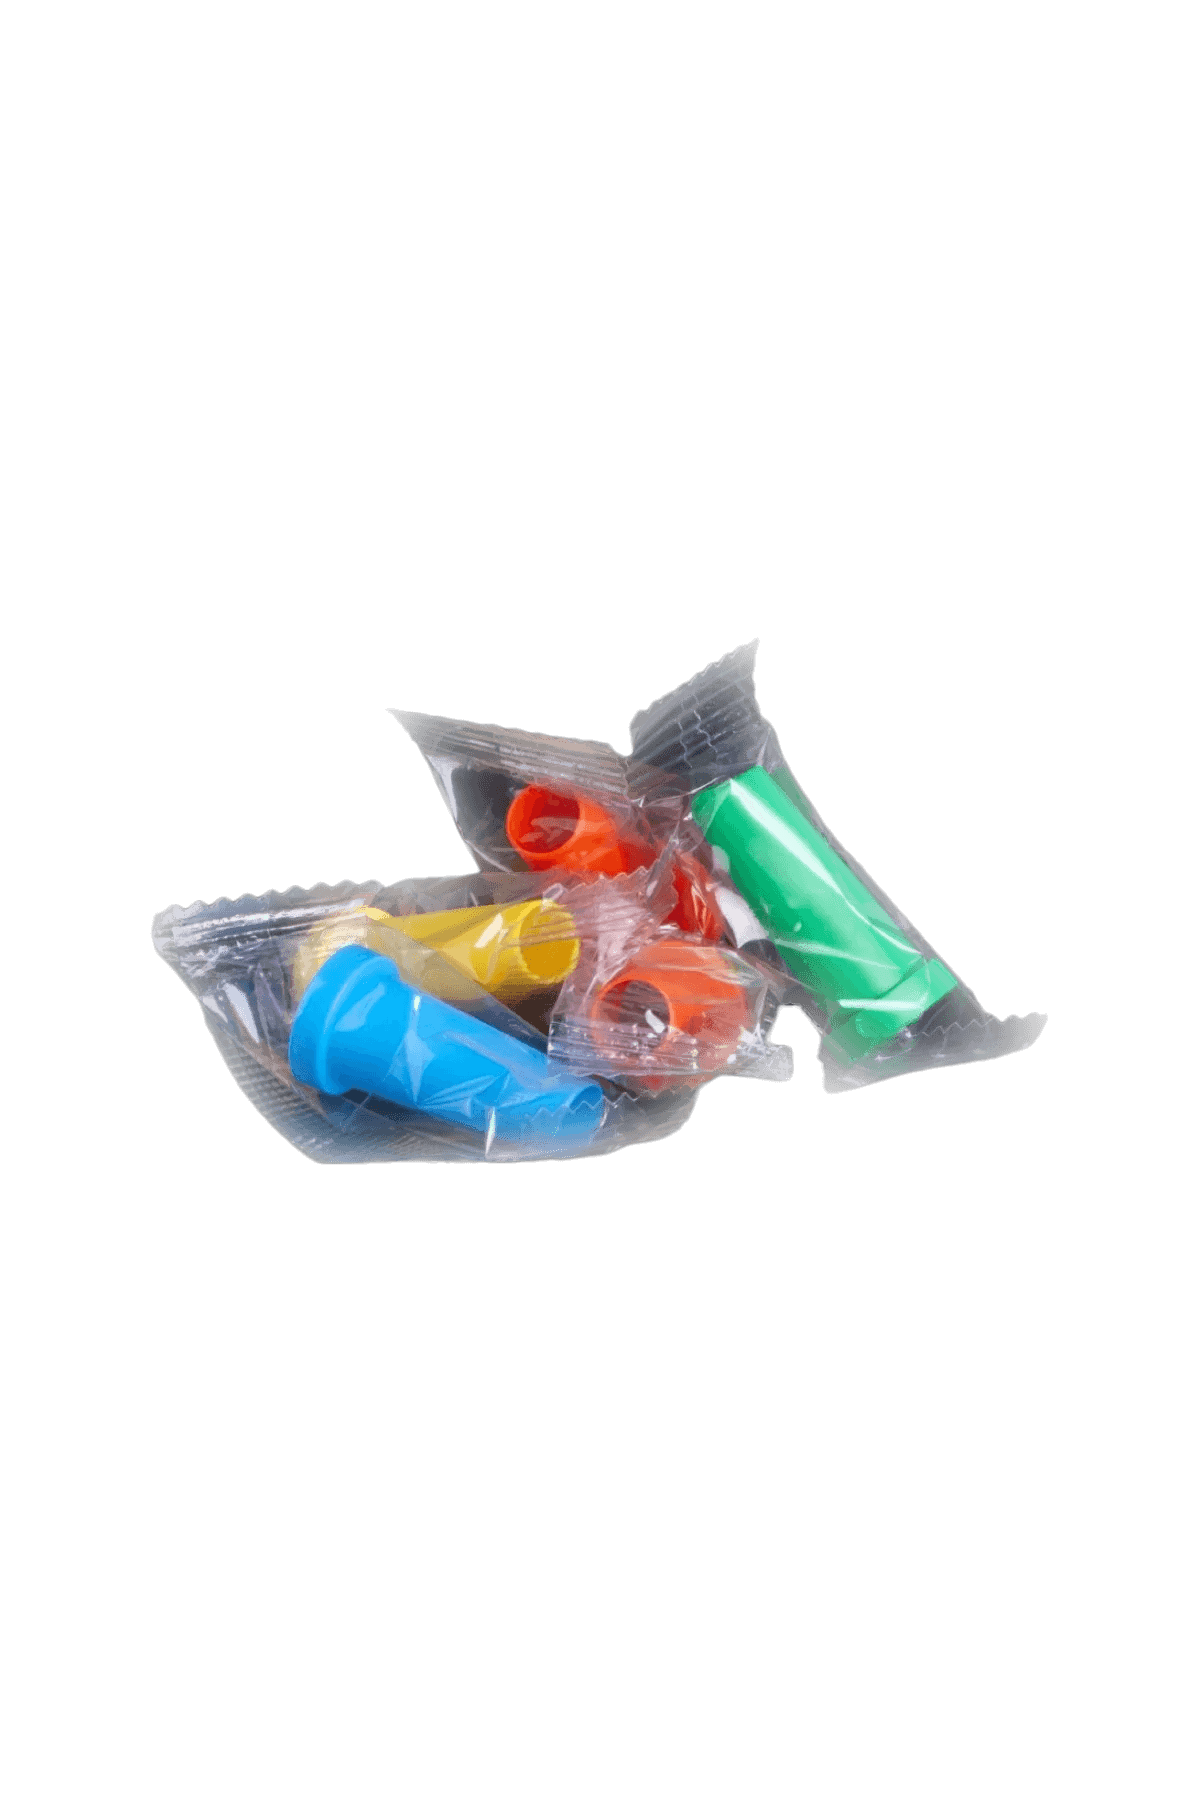 Disposable Hygienic Mouthpieces